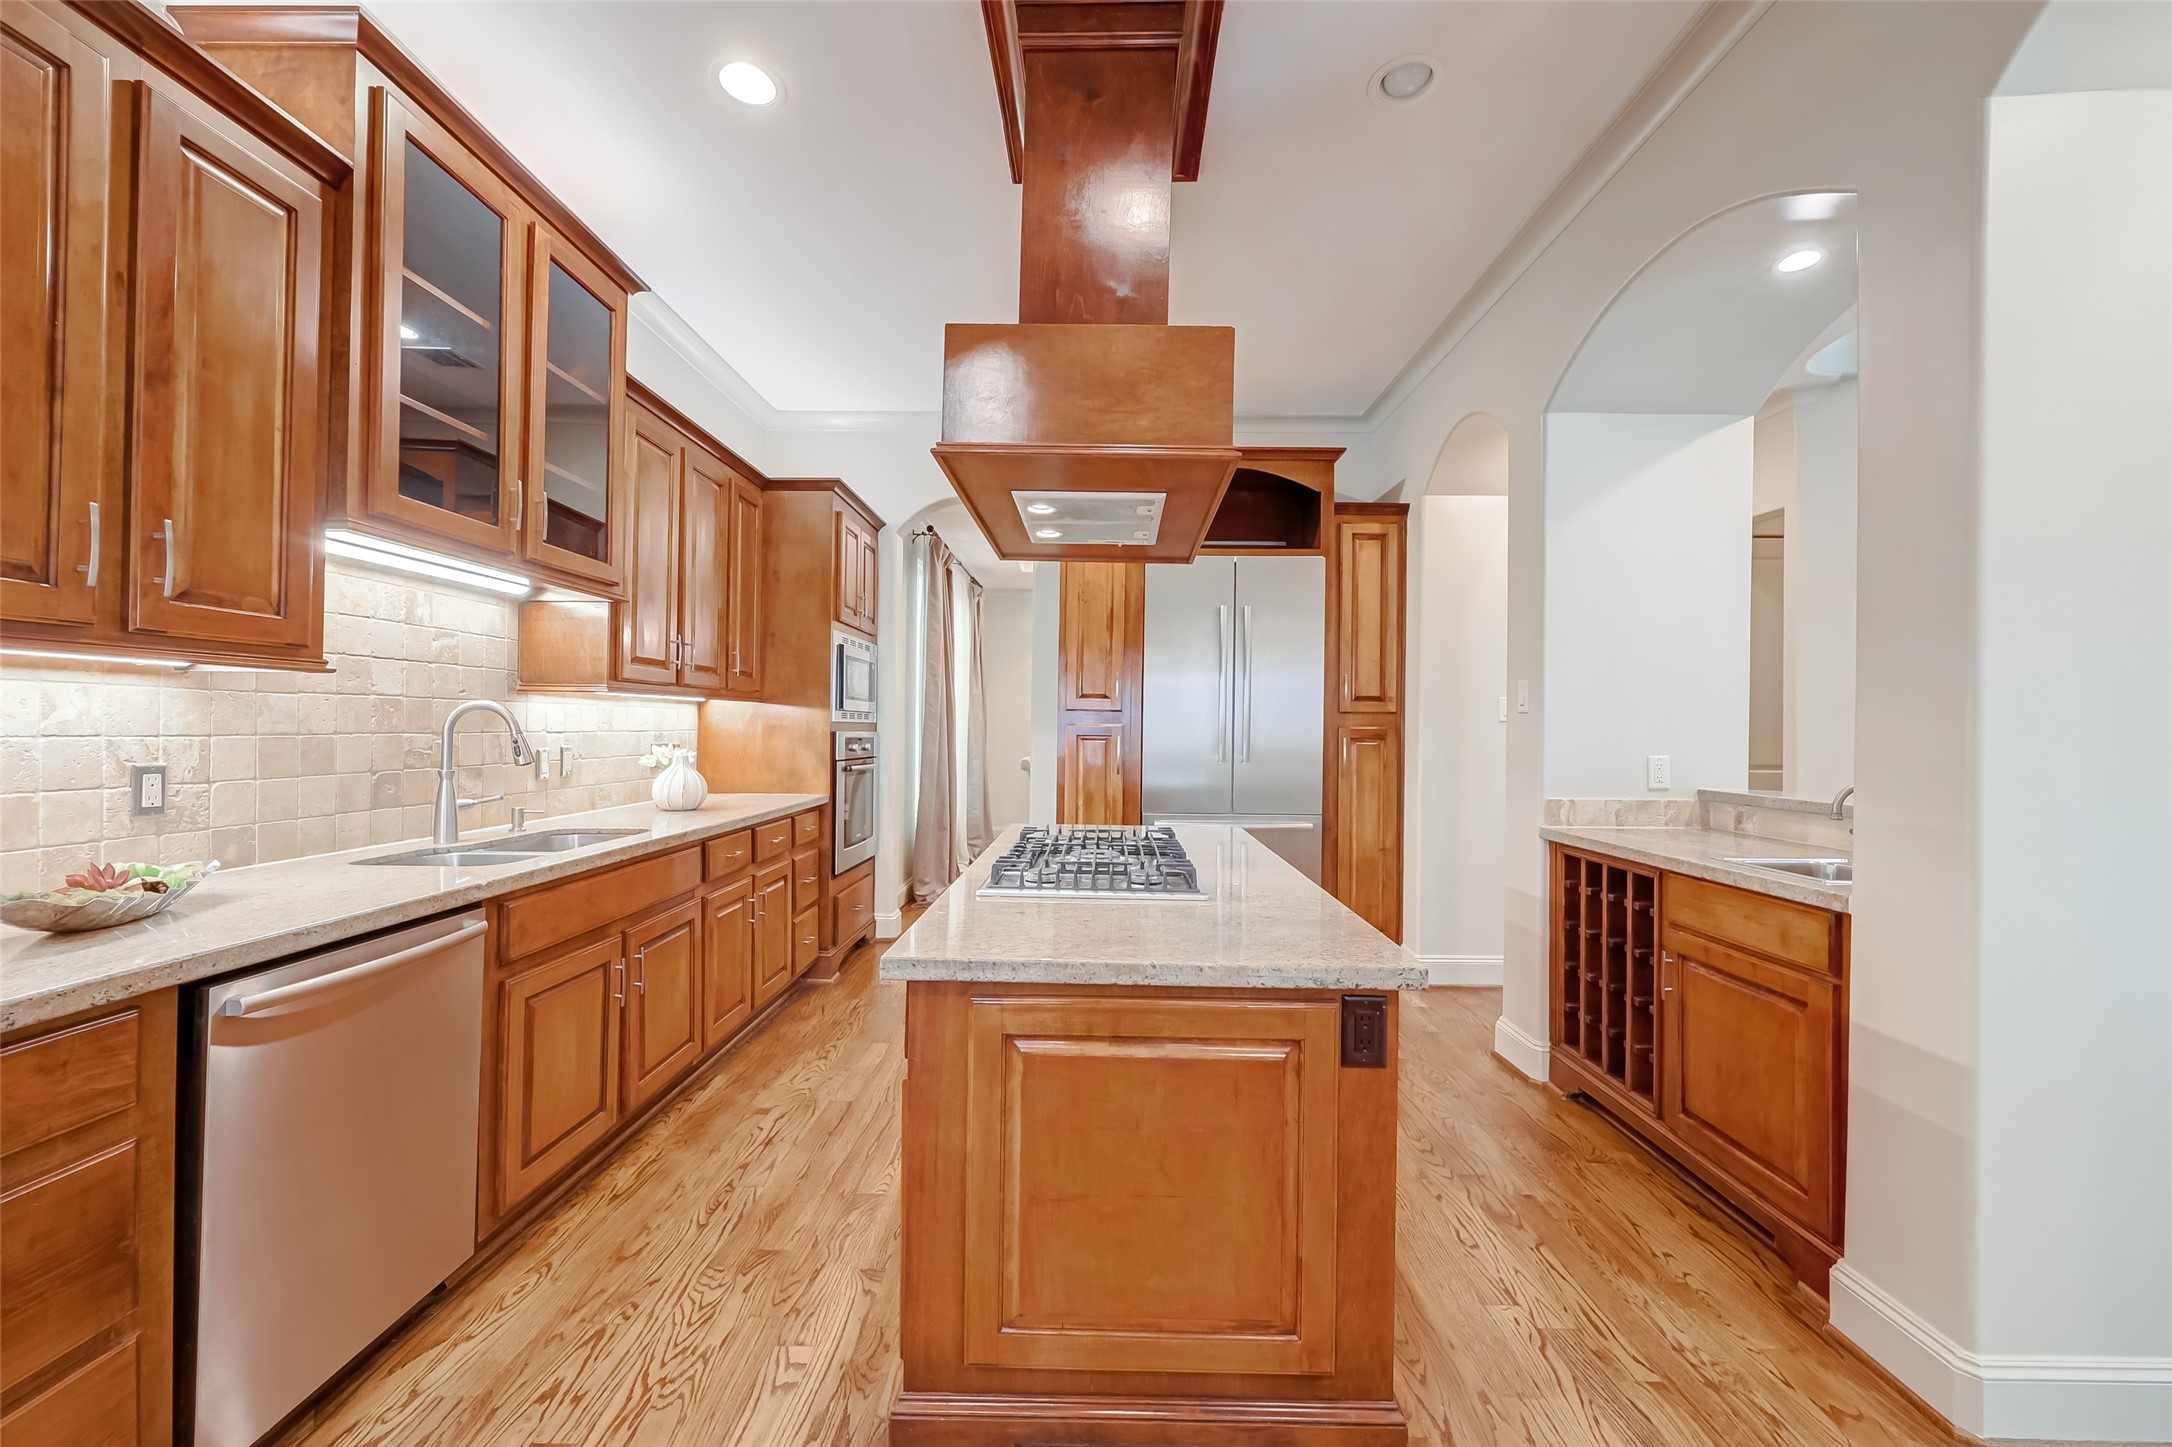 Gourmet style kitchen for an inspiring home-chef. Featuring ample storage in the custom cabinets, Bosh Stainless Steel appliances, granite counters, a 5 burner gas cook top with overhead vent and a wet bar with built-in wine storage.